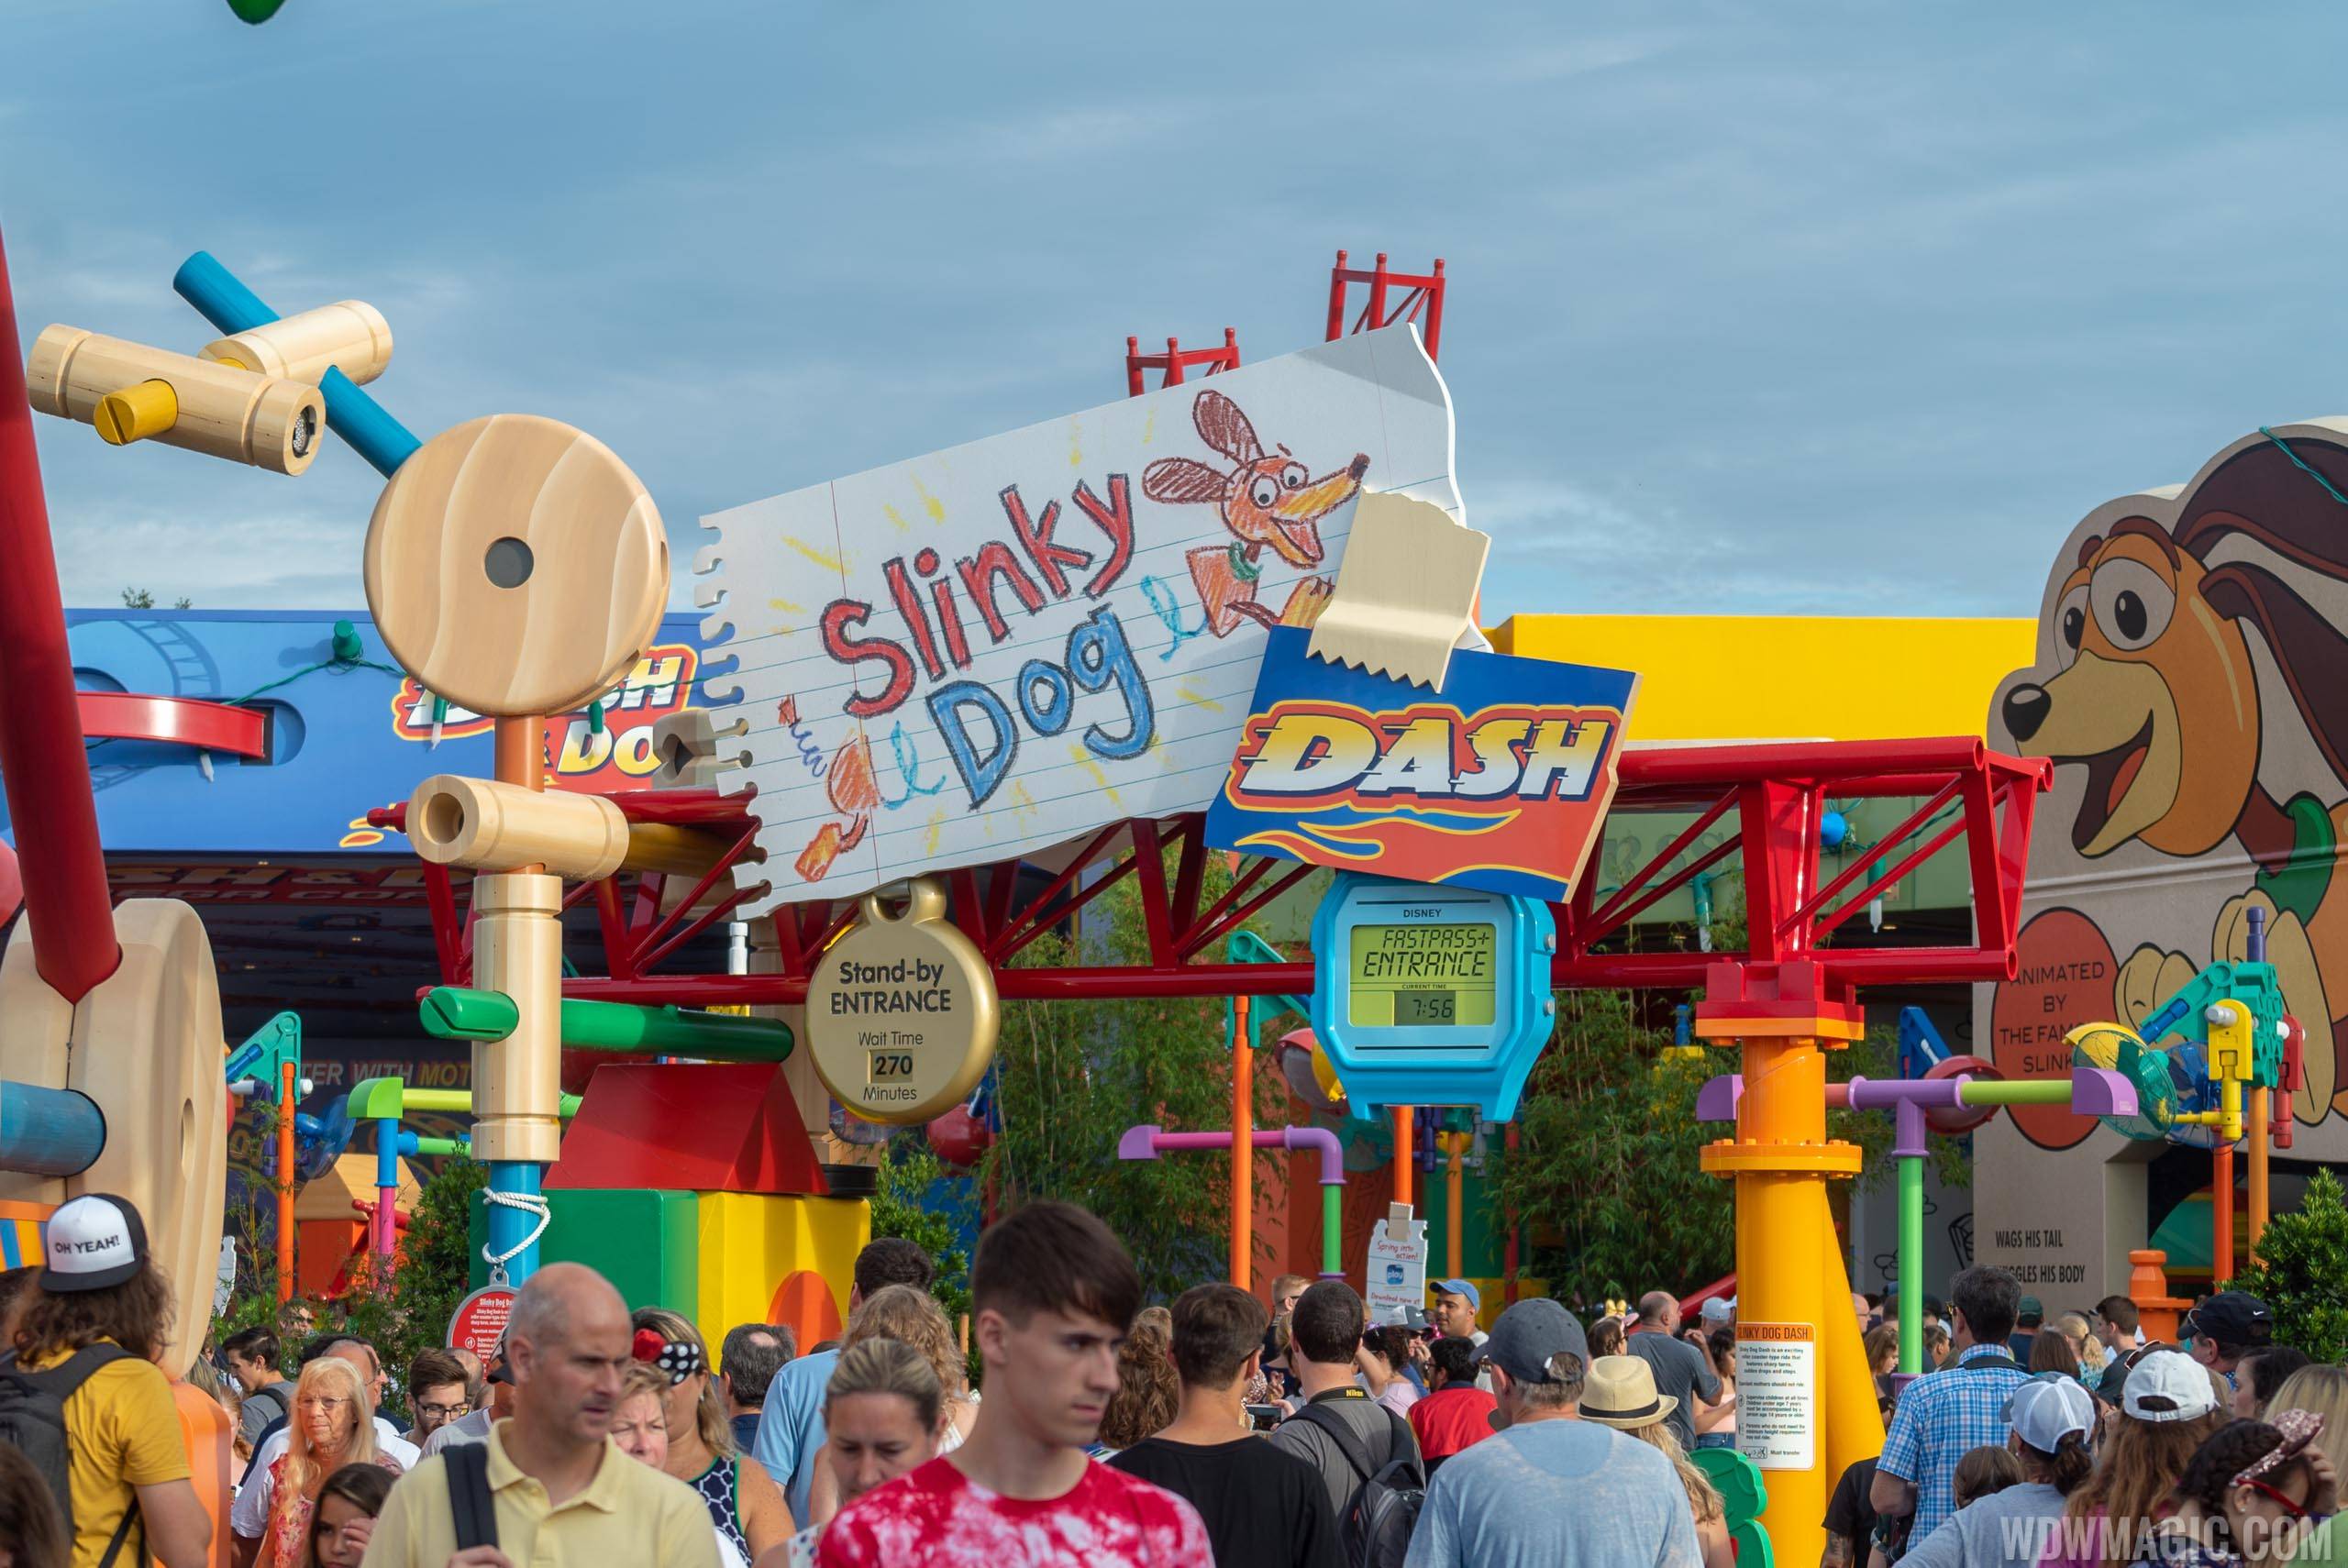 Wait Times at Slinky Dog Dash quickly reached the 4 hour mark